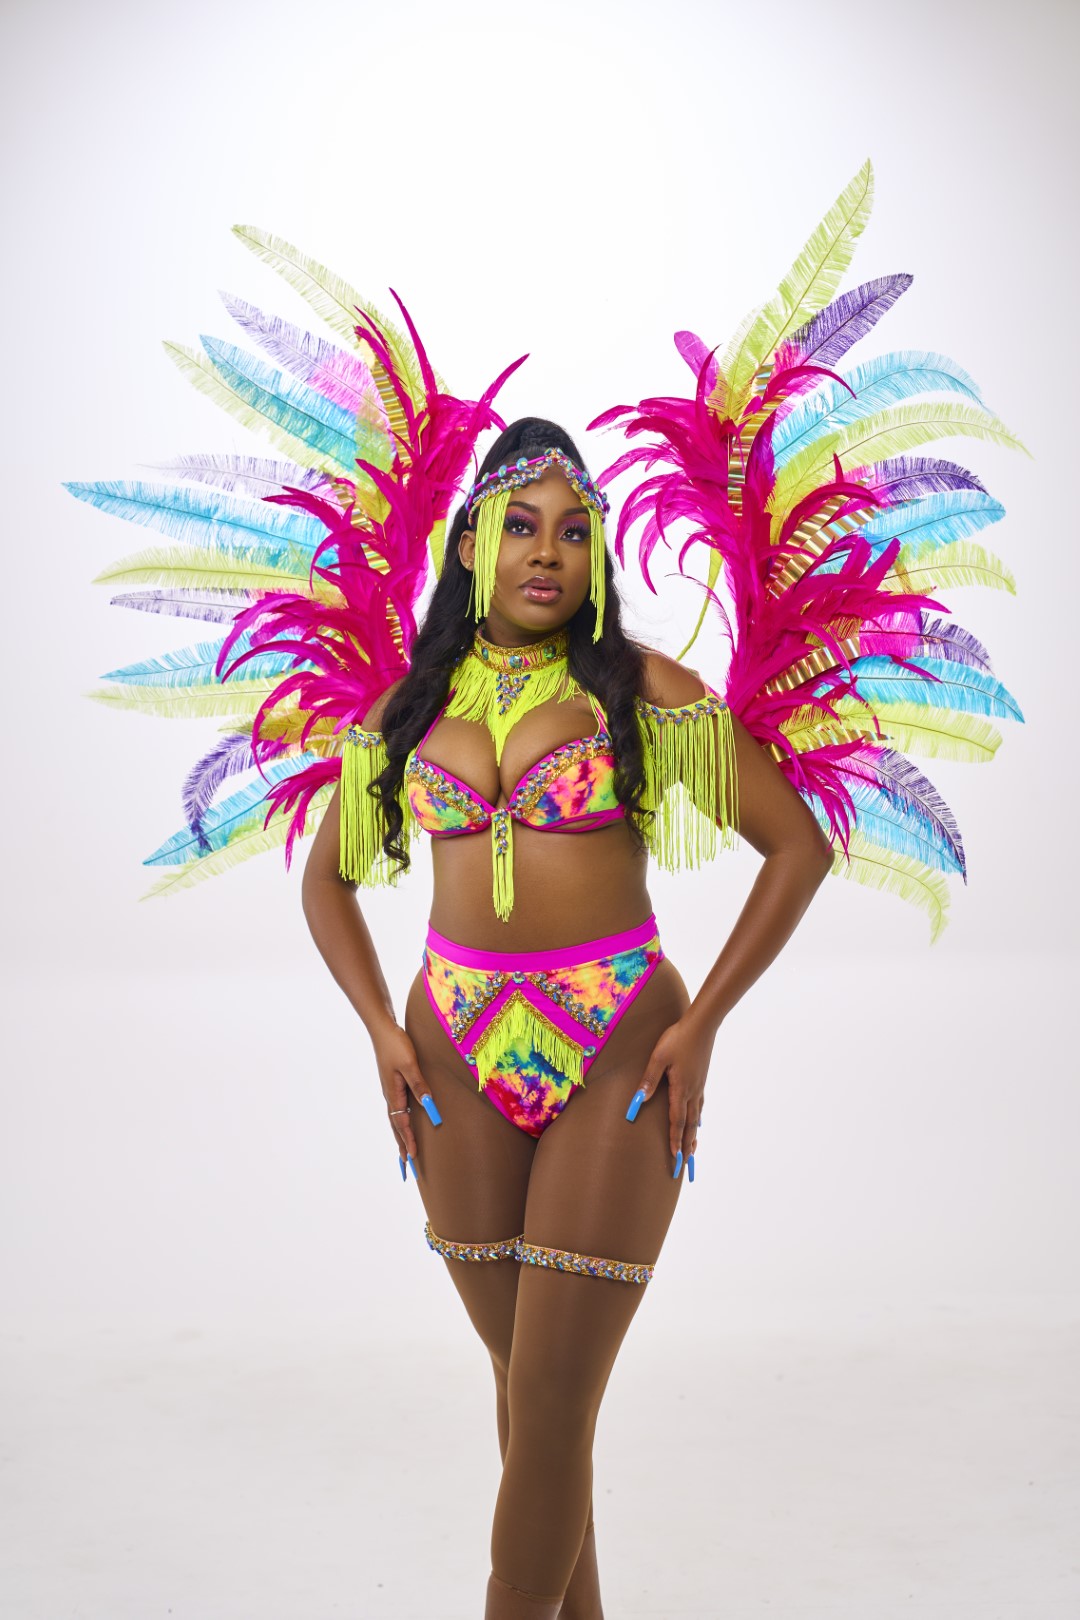 Micles Fashion Network - Get Your #1 Carnival Accessory in Stores Now!  Micles #fishnet tights #Carnival2020 #miclesfashionnetwork